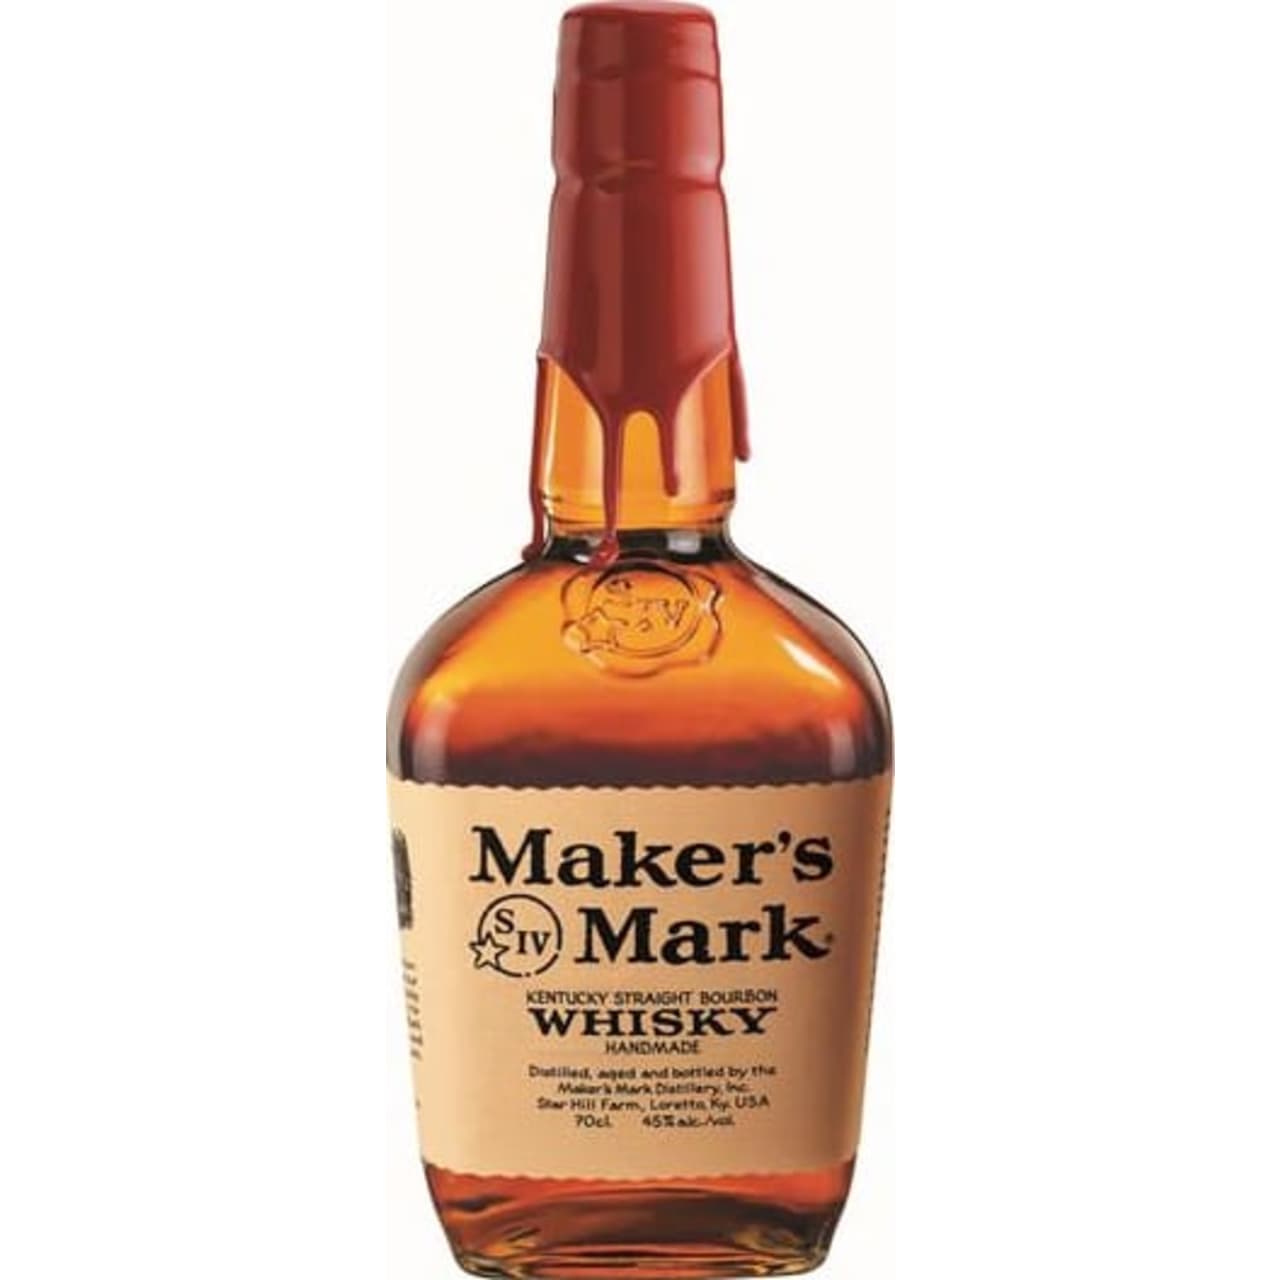 Maker's Mark Bourbon is distinct not only for its unique flavour but its iconic bottle that is hand-dipped and sealed in red wax. Smooth and subtle, Maker's Mark is bourbon with a distinguished history.